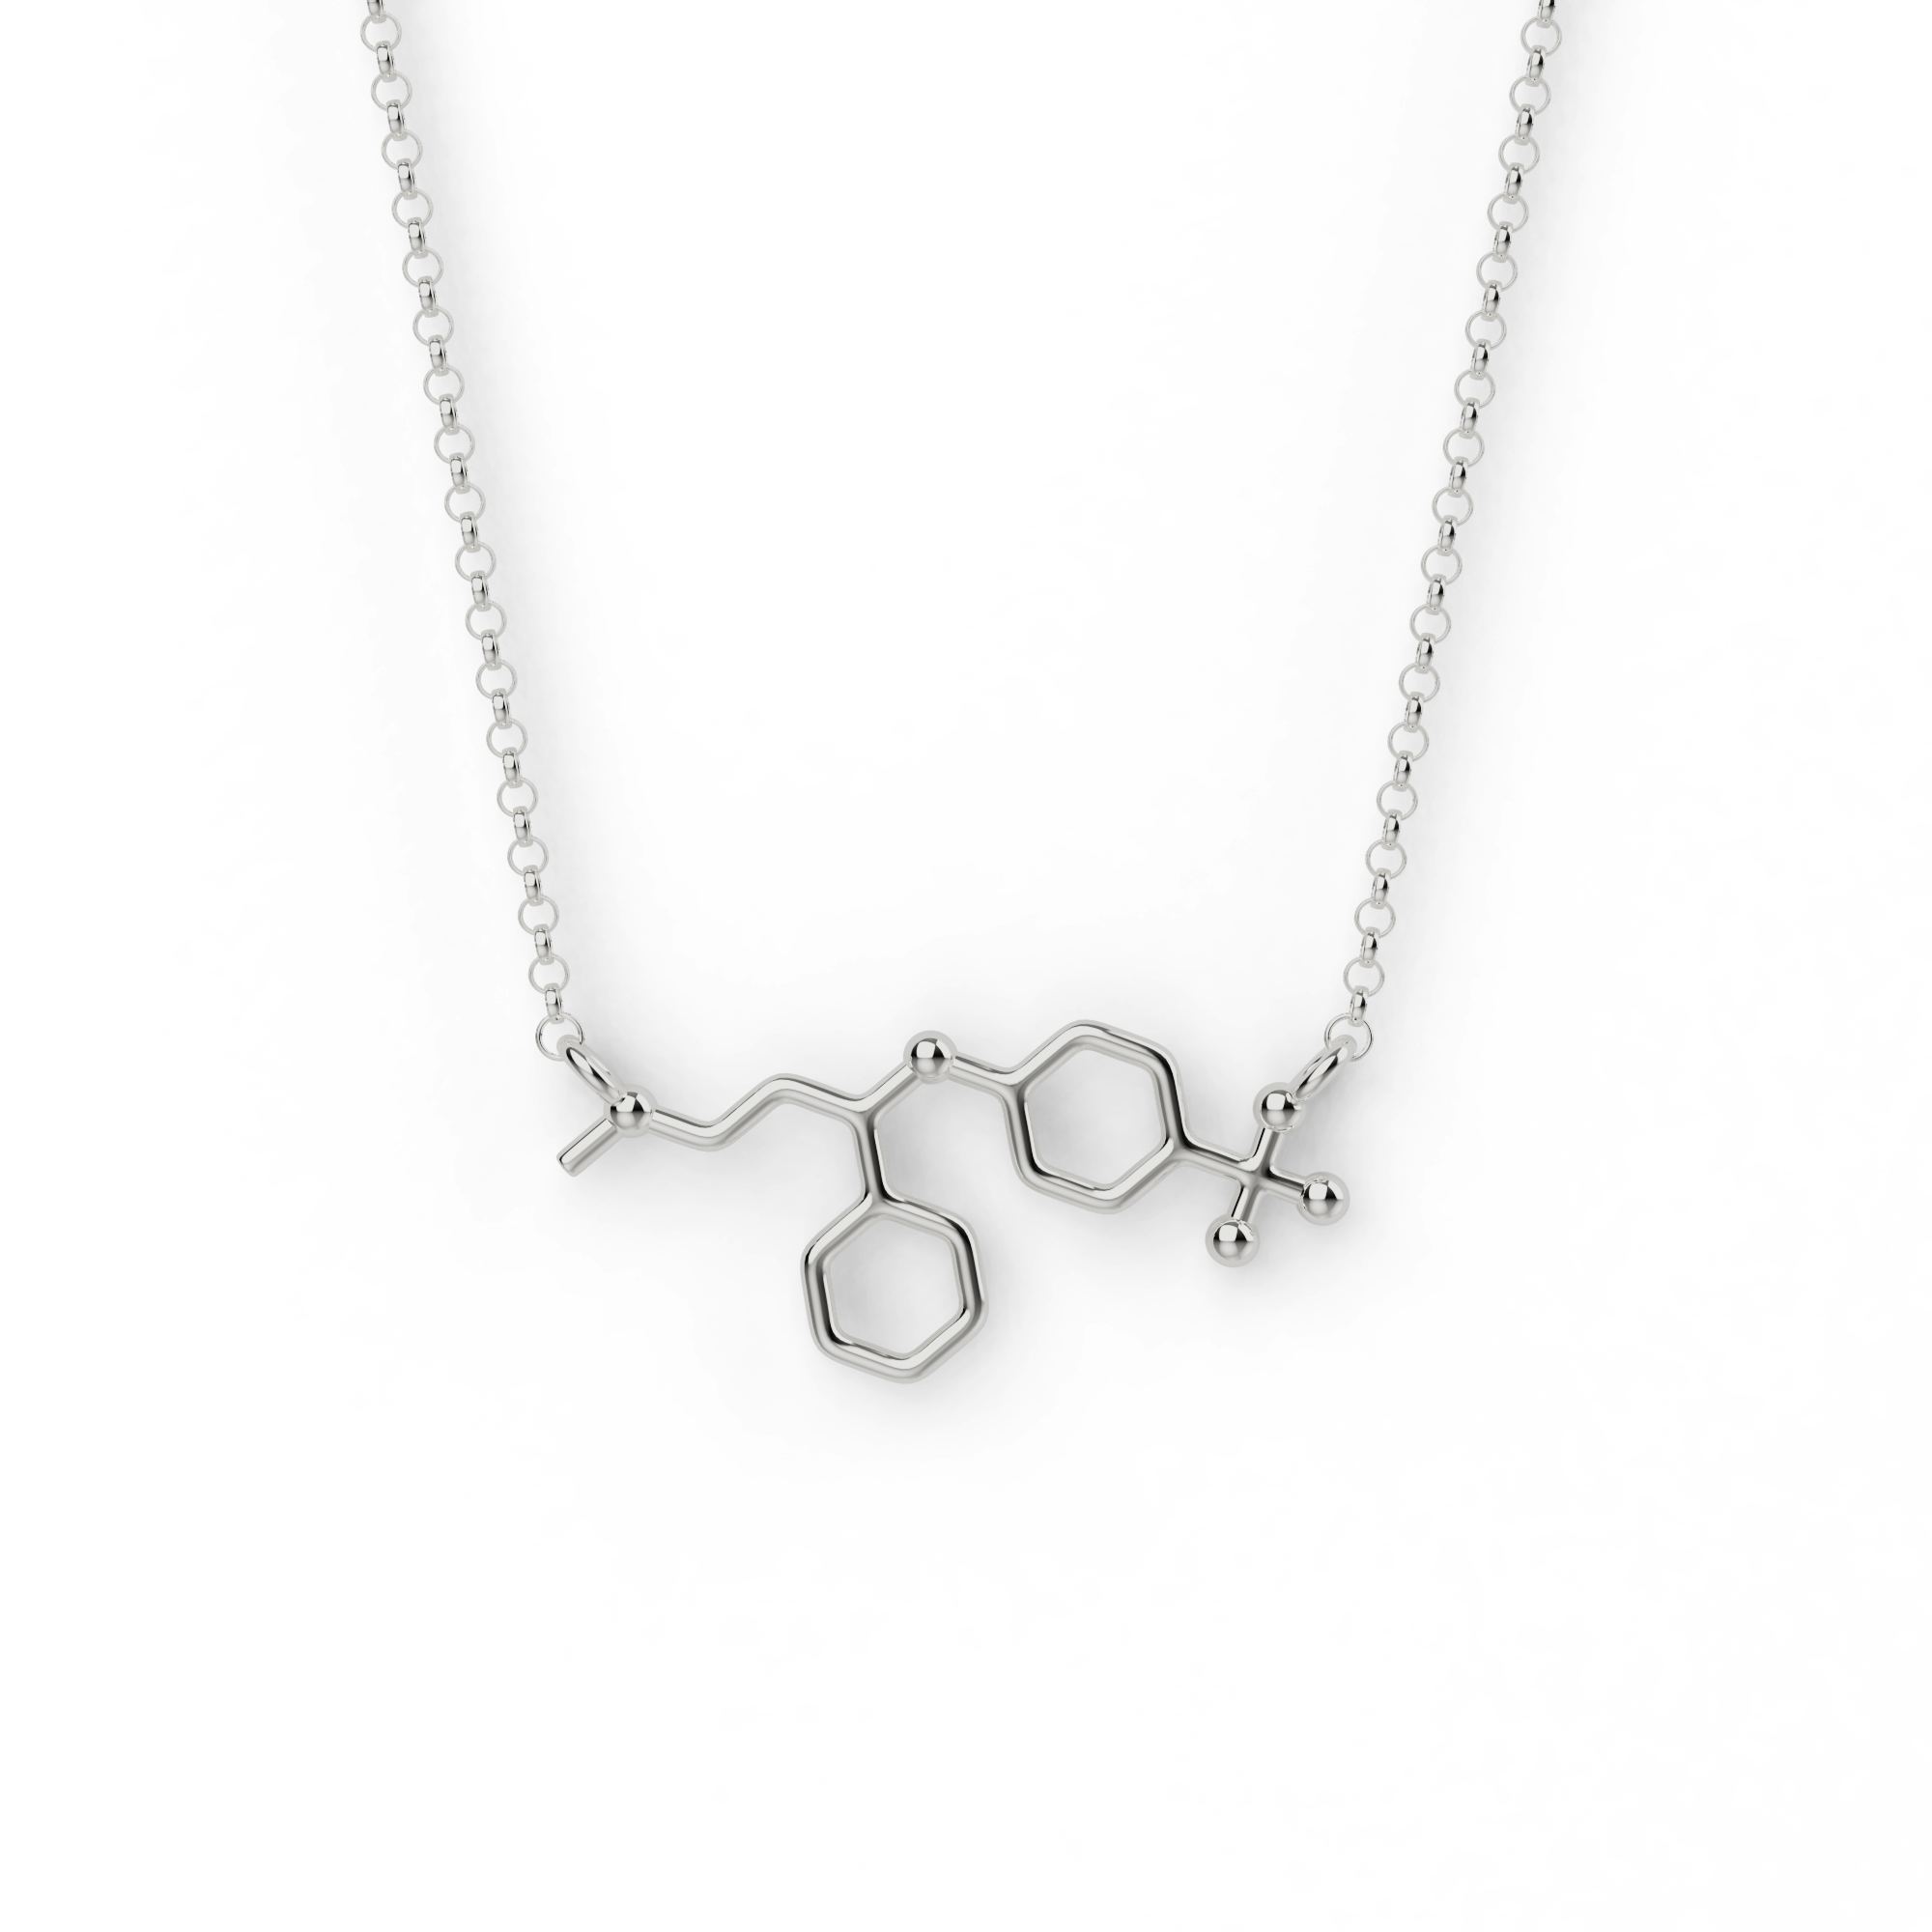 fluoxetine necklace | silver